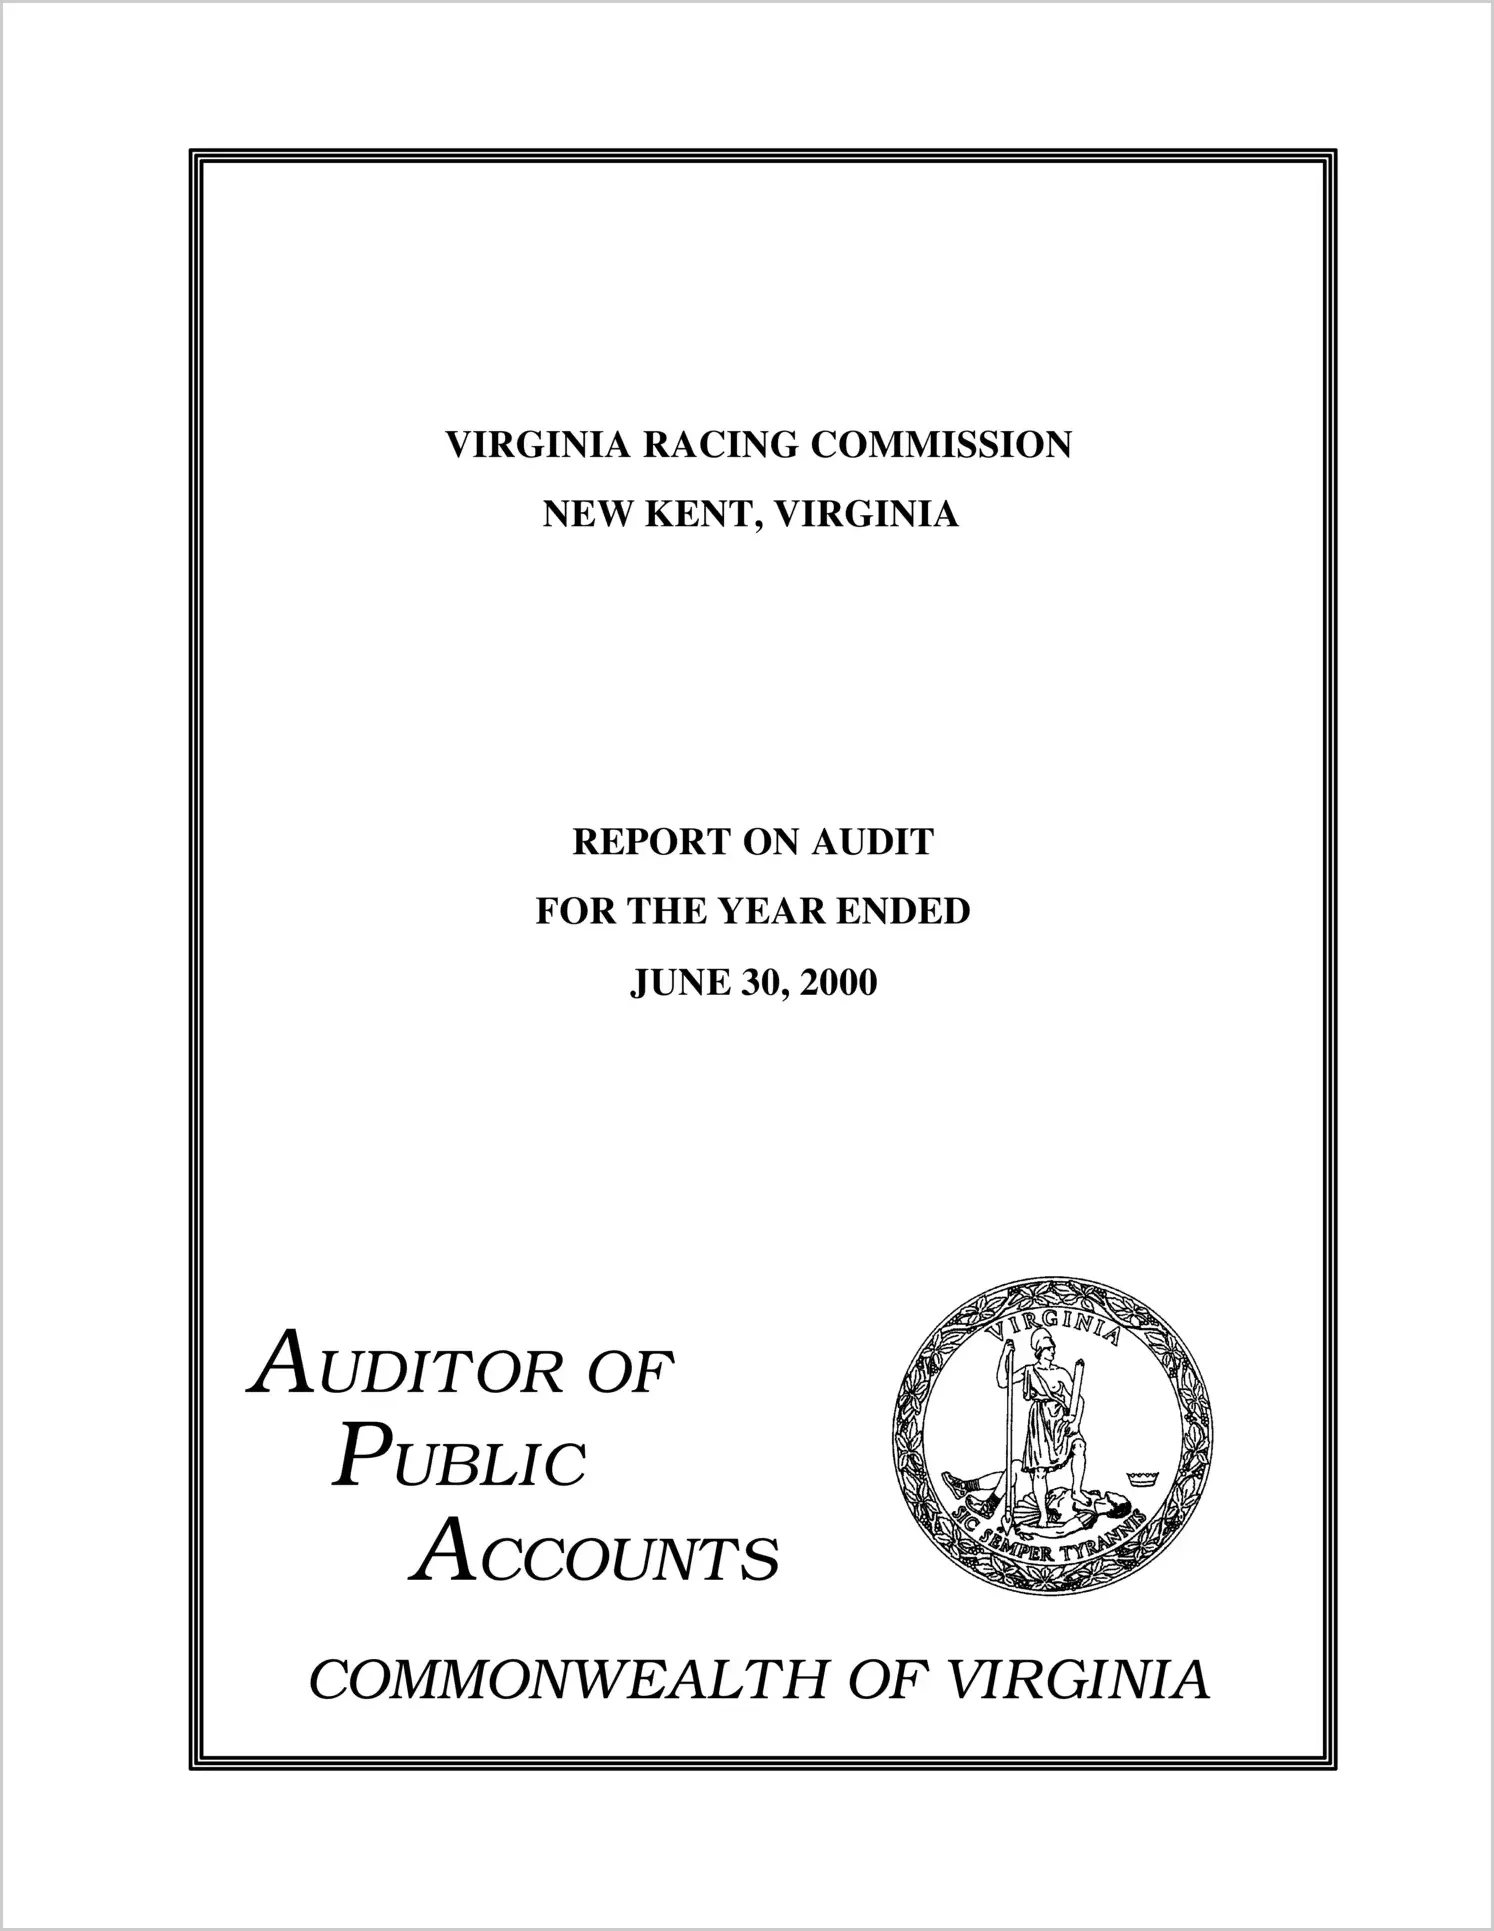 Virginia Racing Commission for the year ended June 30, 2000